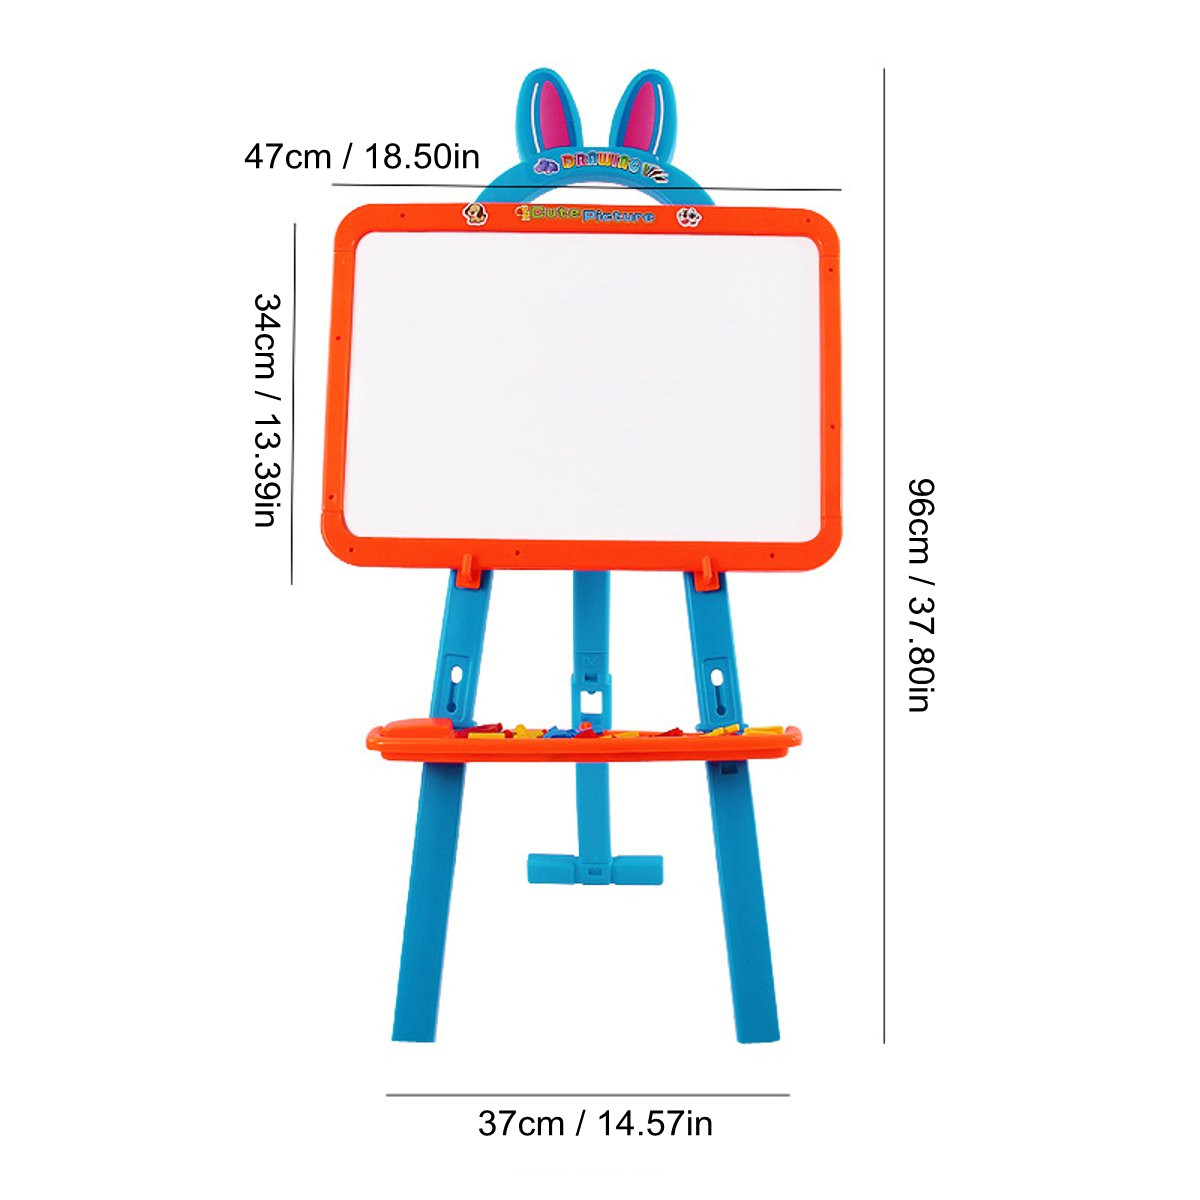 Magnetic Drawing Blackboard Whiteboard Double Sided Adjustable Easel Painting Toy Early Education Learning Toys For Children Kid